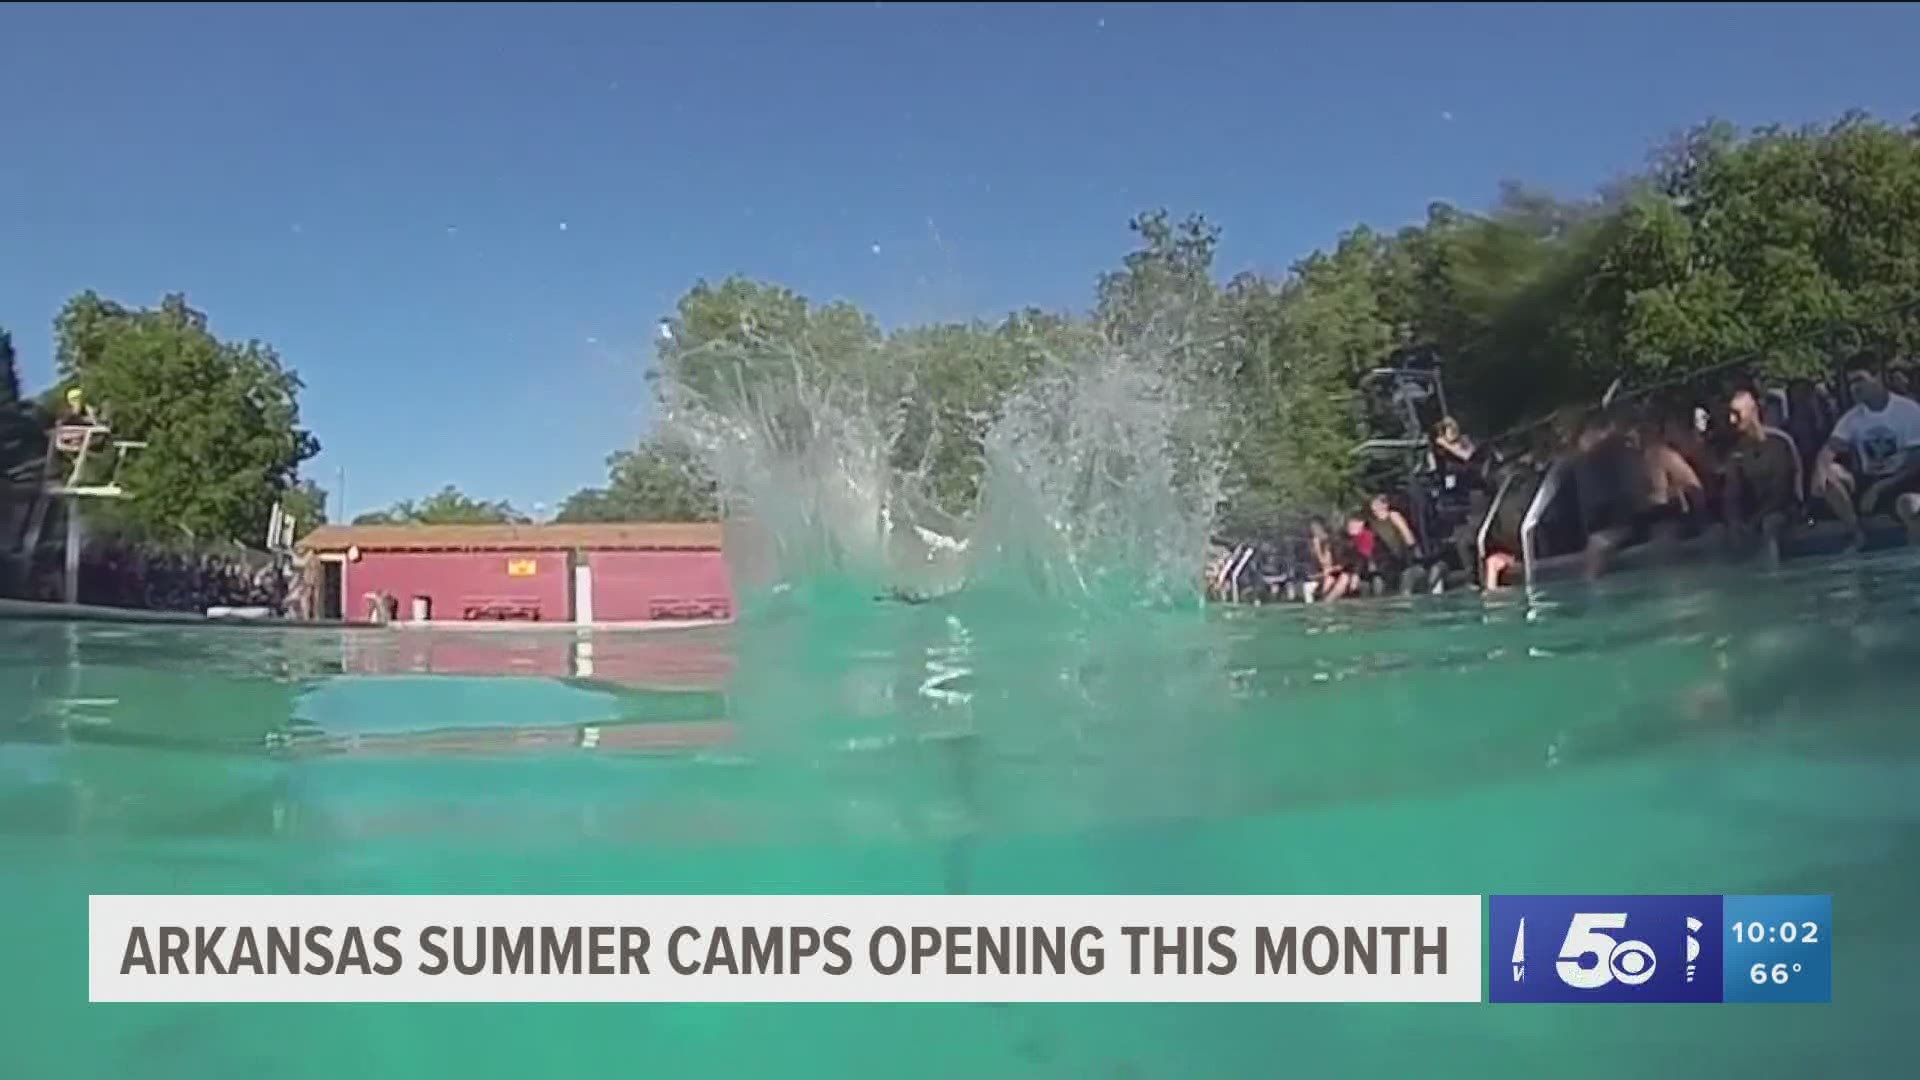 Arkansas allowing summer camps to open late this month